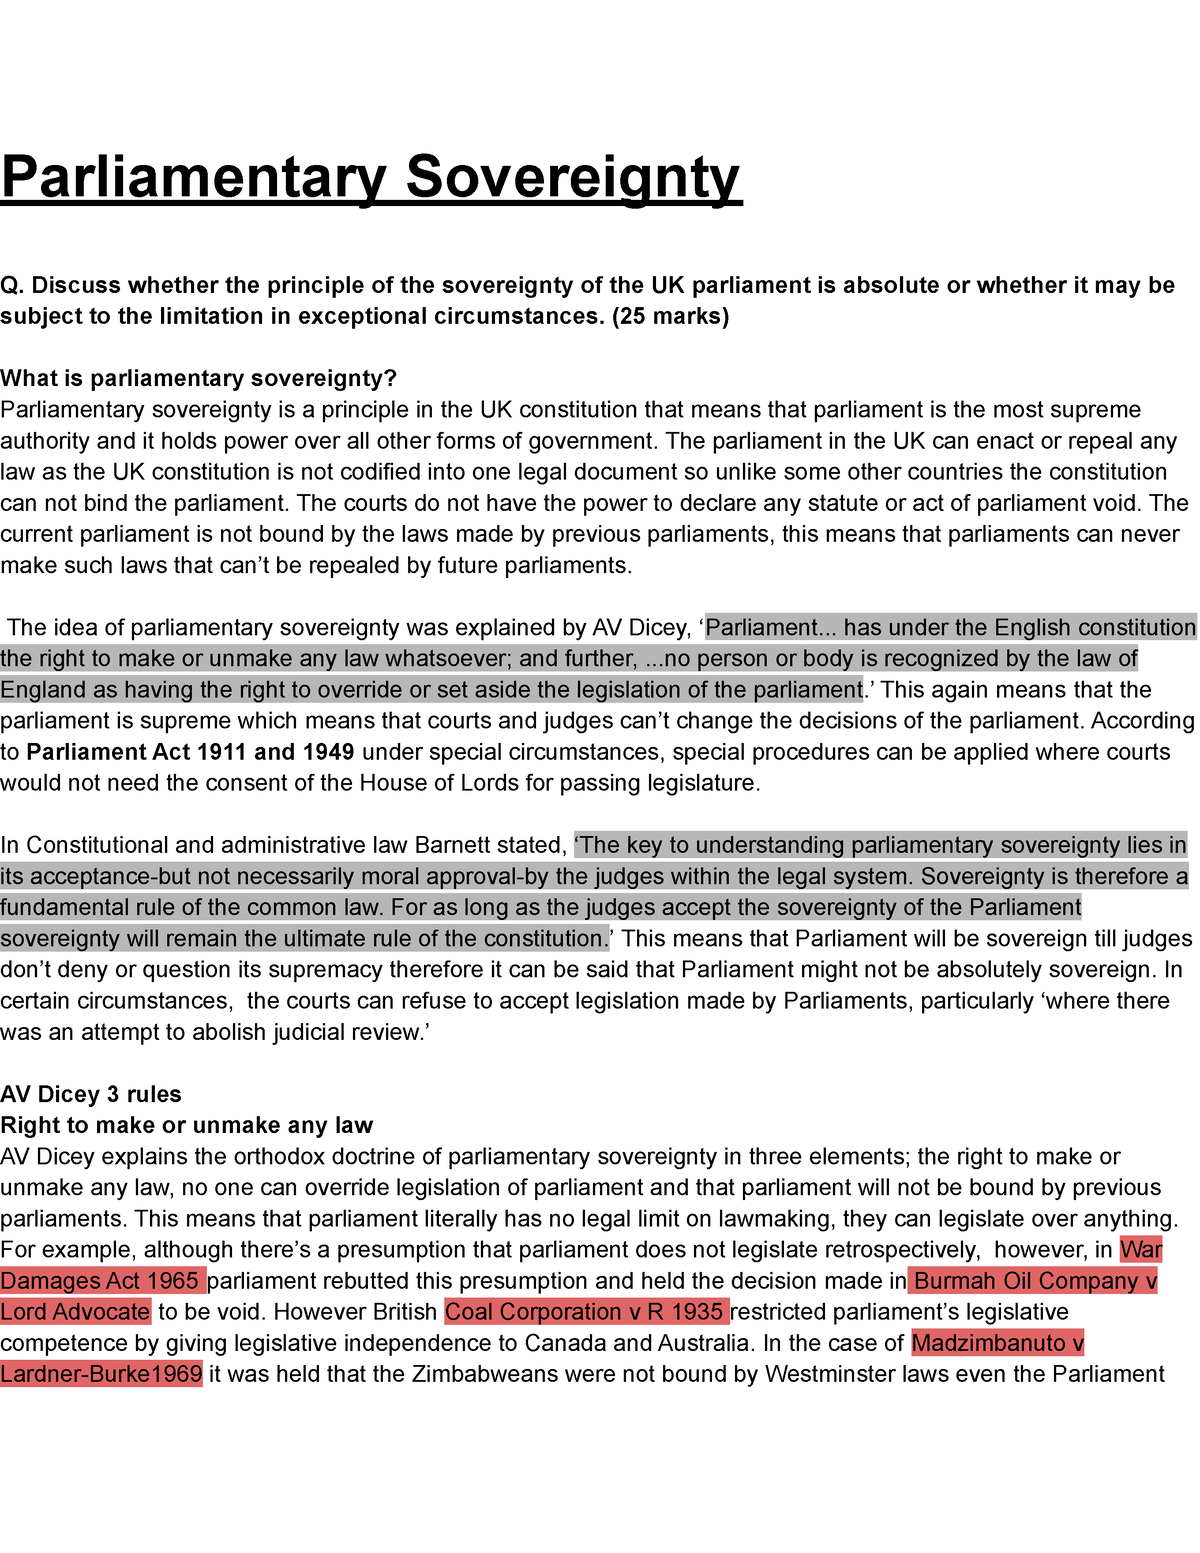 rule of law and parliamentary sovereignty essay